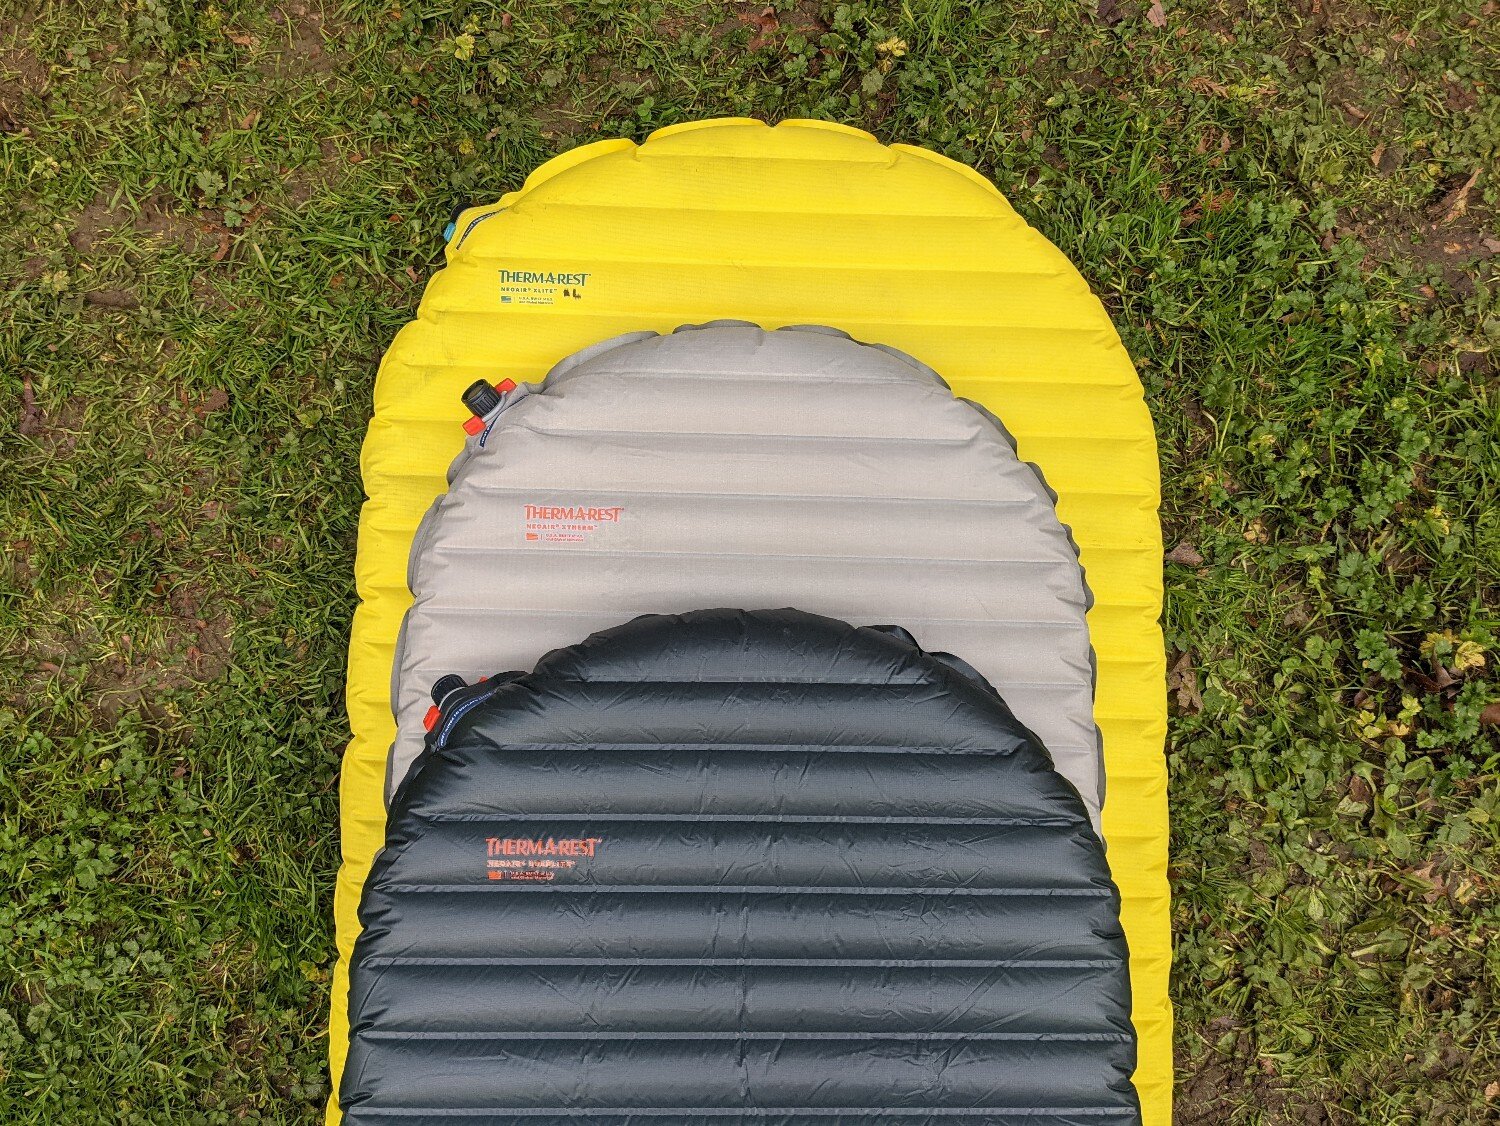 Comparing the The Therm-a-Rest Uberlite (top), Therm-a-Rest Xtherm (Middle), and Therm-a-Rest XLite (Bottom, reg/wide size))